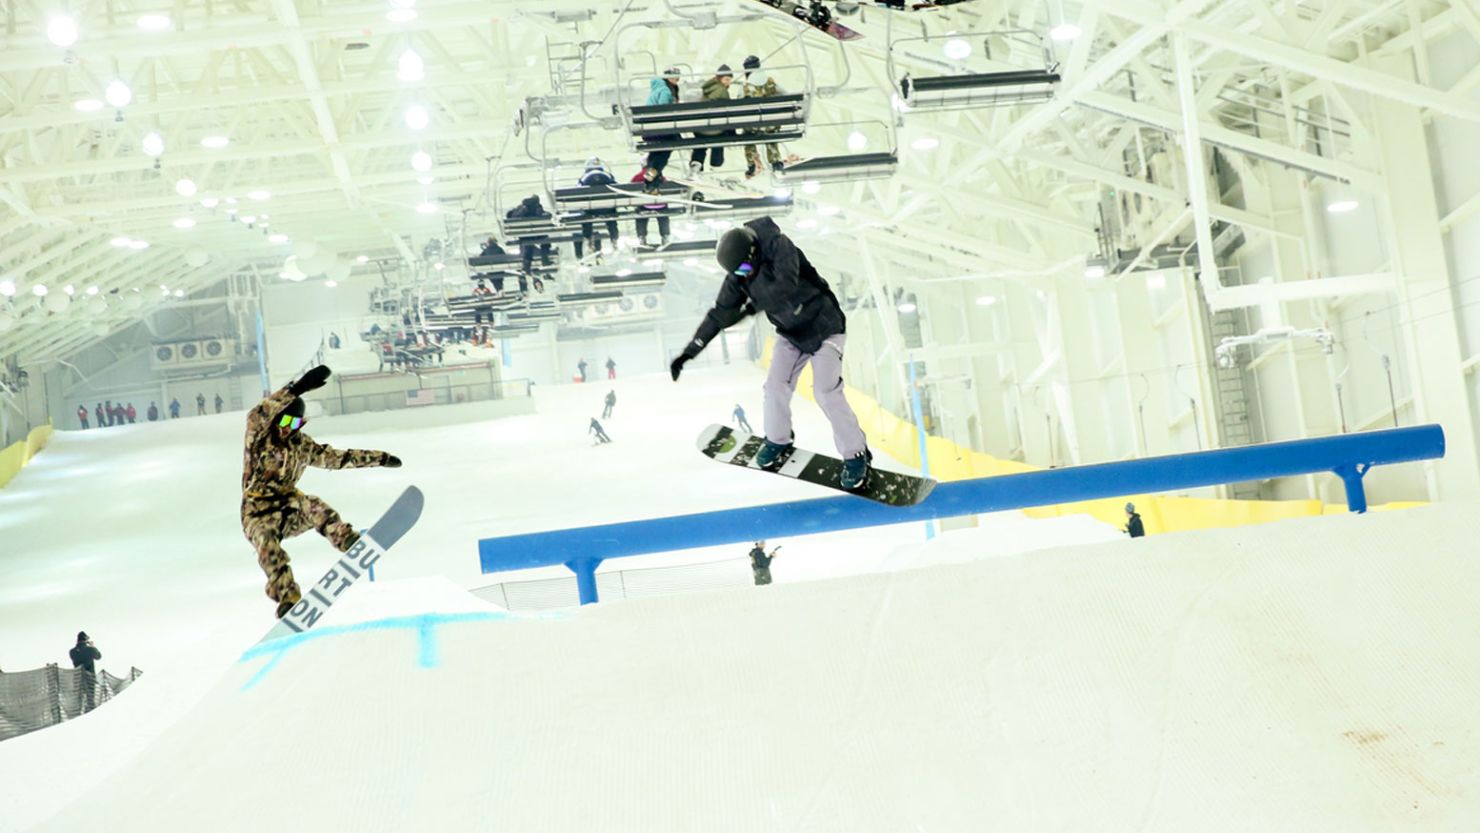 Snowboarders and skiers now can enjoy North America's first indoor ski and snowboard park in East Rutherford, New Jersey.